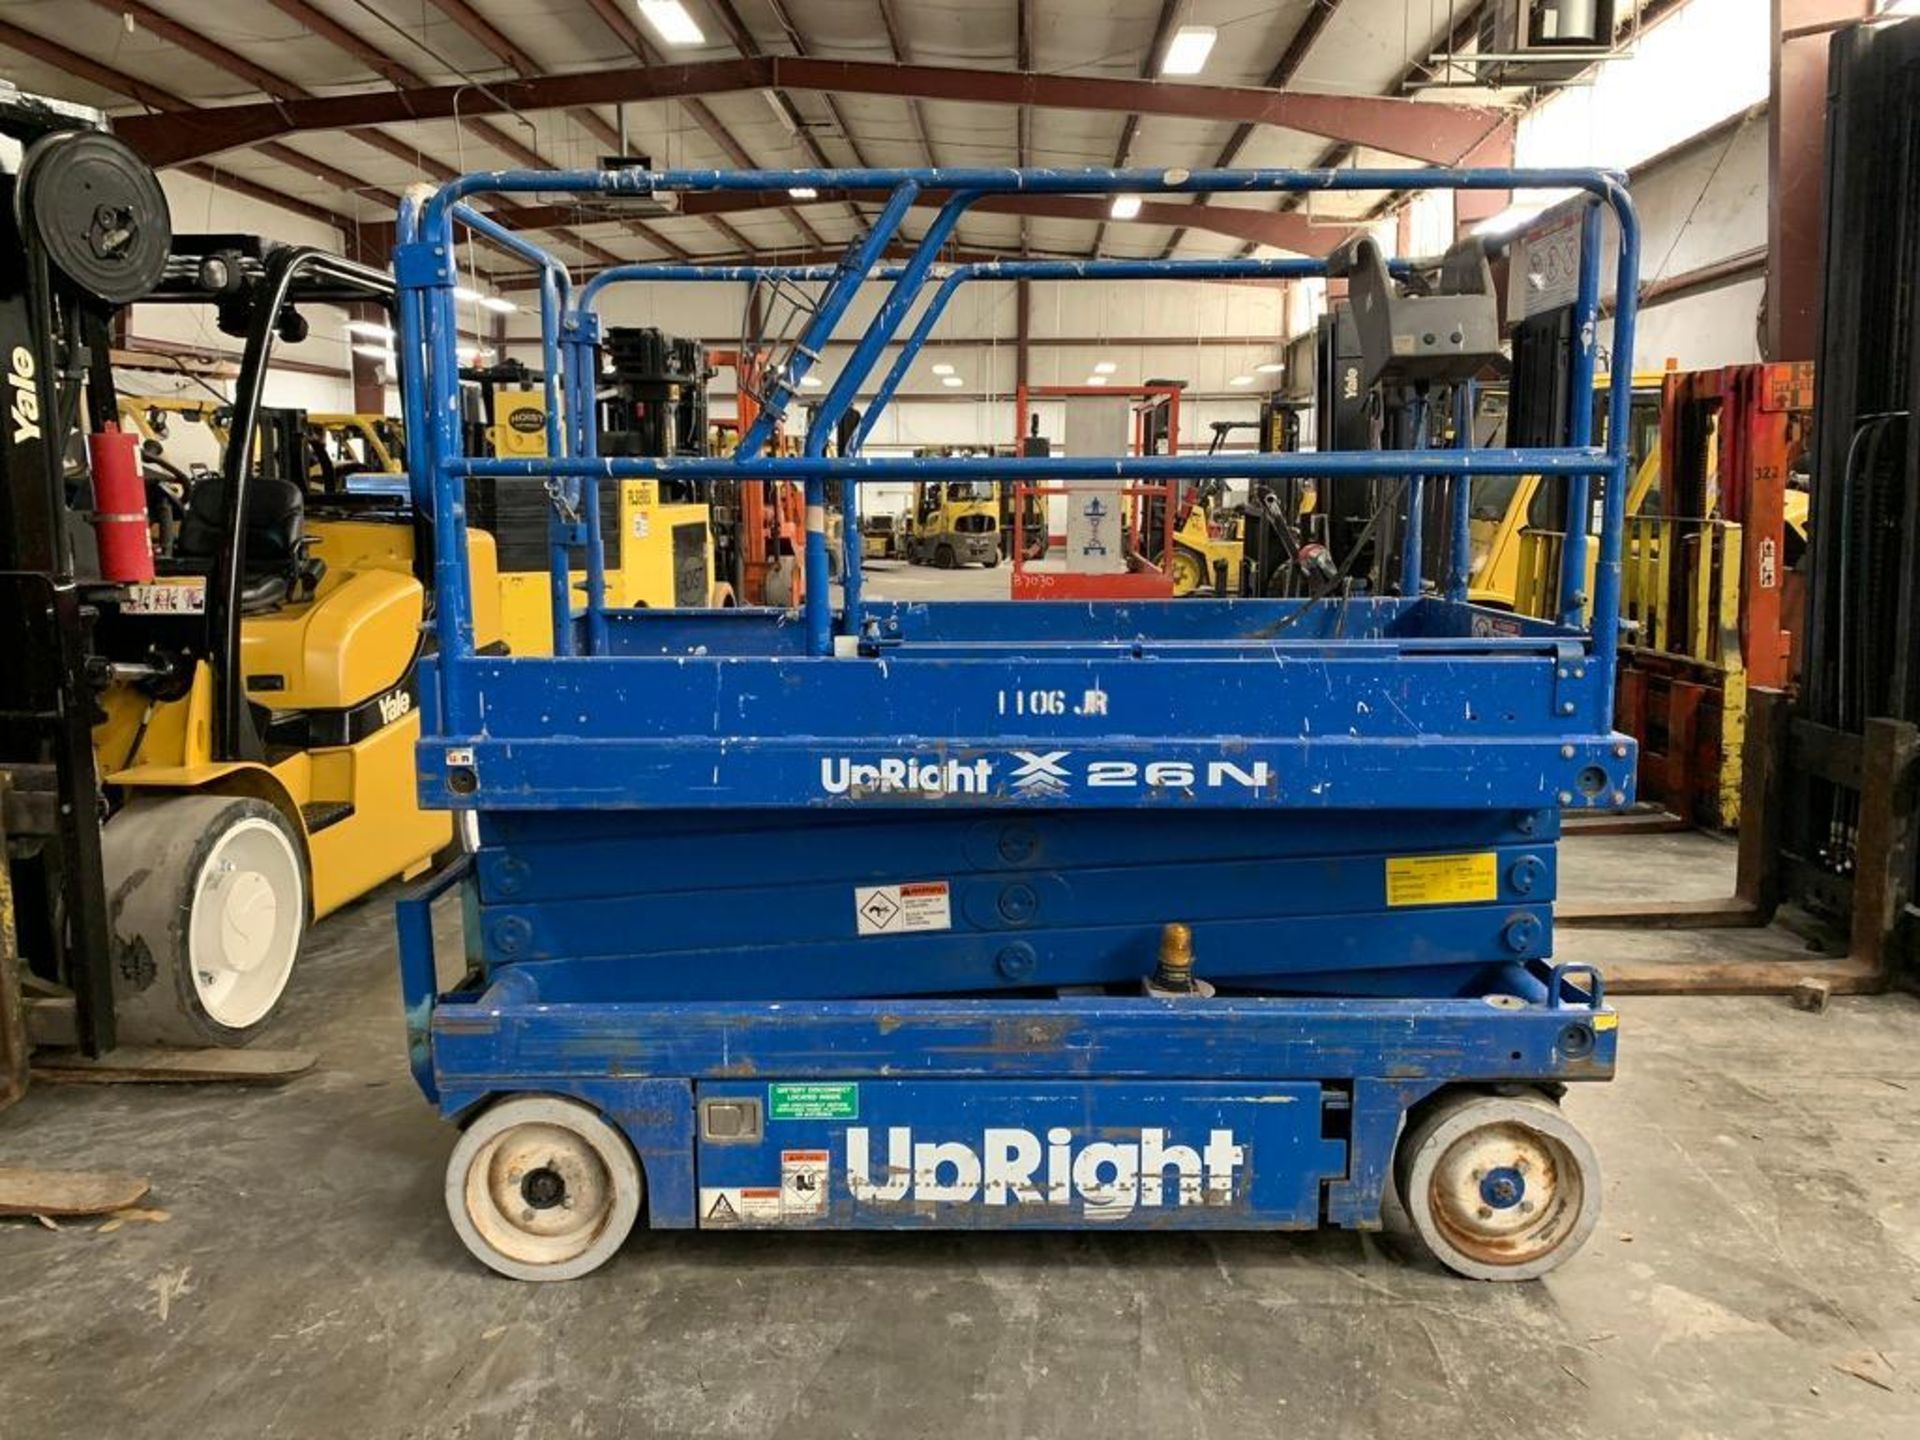 2001 UPRIGHT 26' ELECTRIC SCISSOR LIFT, MODEL: 26N, S/N: 16971, SOLID TIRES, 26' TALL PLATFORM HEIGH - Image 2 of 5